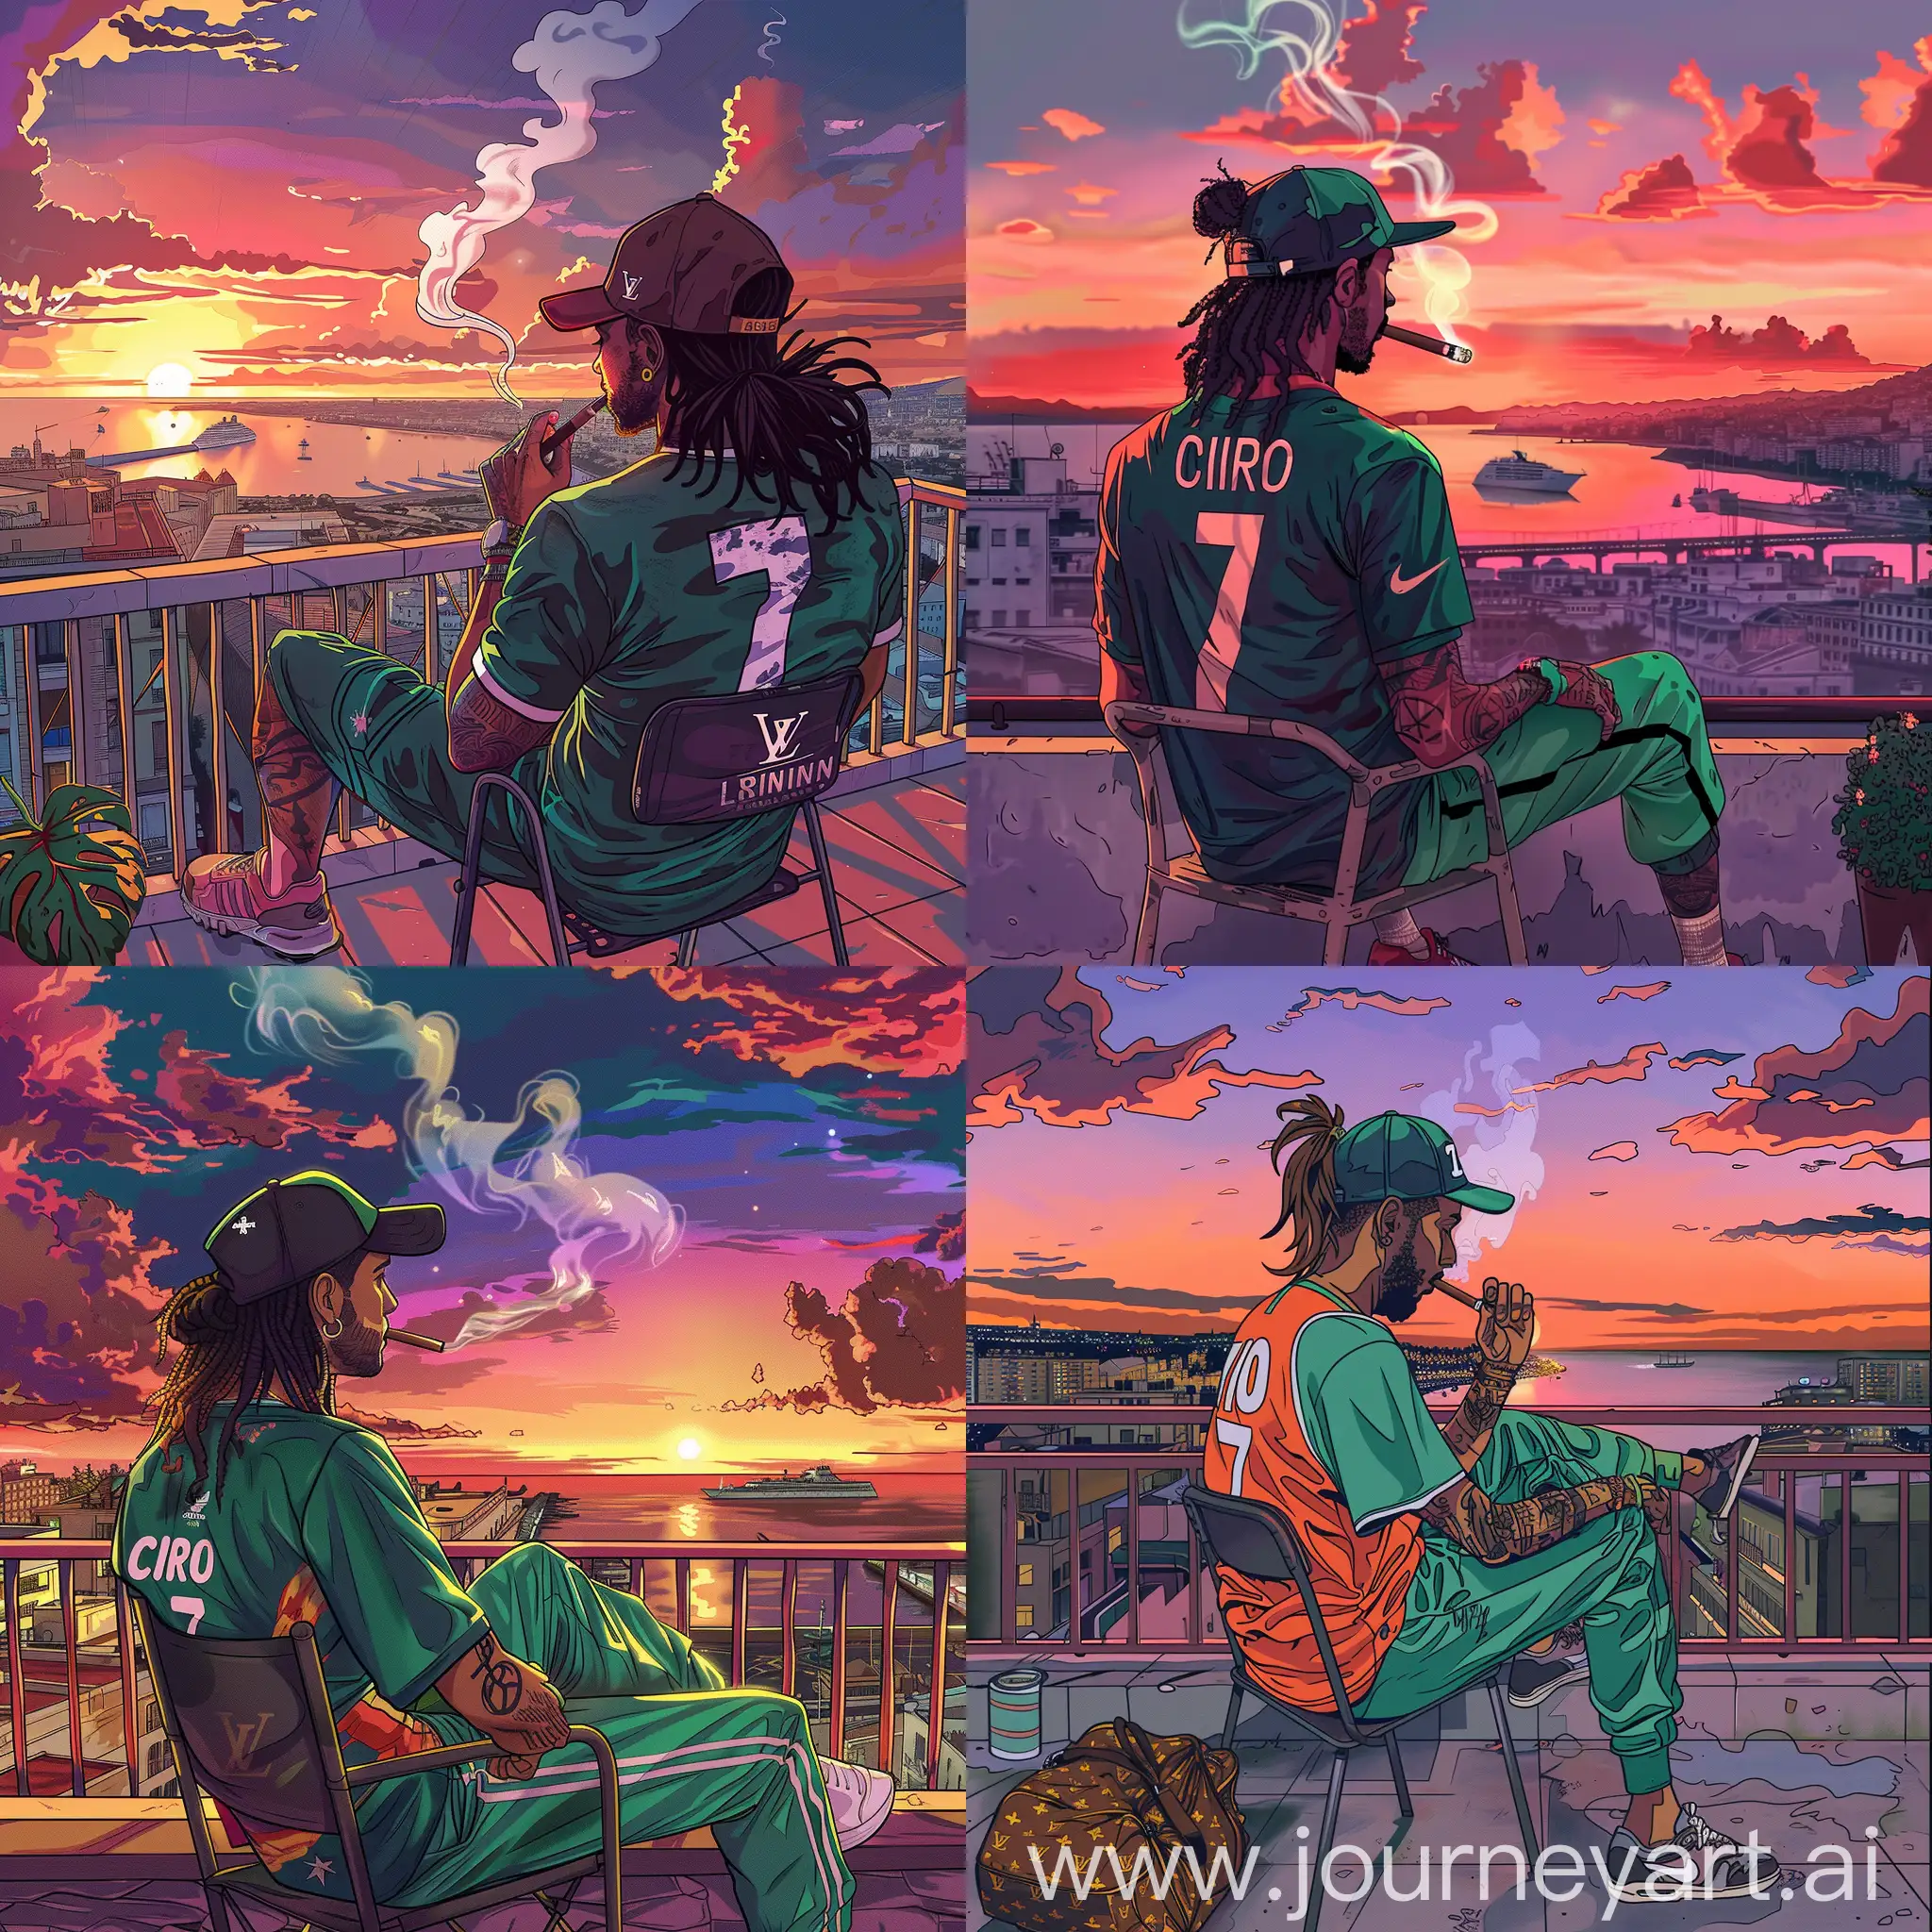 Cartoonish ,stylish young man with long hair tied in a ponytail, wearing a cap and an Algeria soccer jersey with the name 'CIRO' and the number '7' on the back, green Adidas sweatpants, Nike Air Max Plus shoes, sitting on a chair on a rooftop overlooking Central Algiers with a view to the pier at sunset, smoking a cigar, Louis Vuitton duffle bag filled with 500 euro bills next to him, luxurious and relaxed atmosphere, yacht visible on the water in the distance, vibrant colors with a mix of pink, purple, and orange hues in the sky --v 6